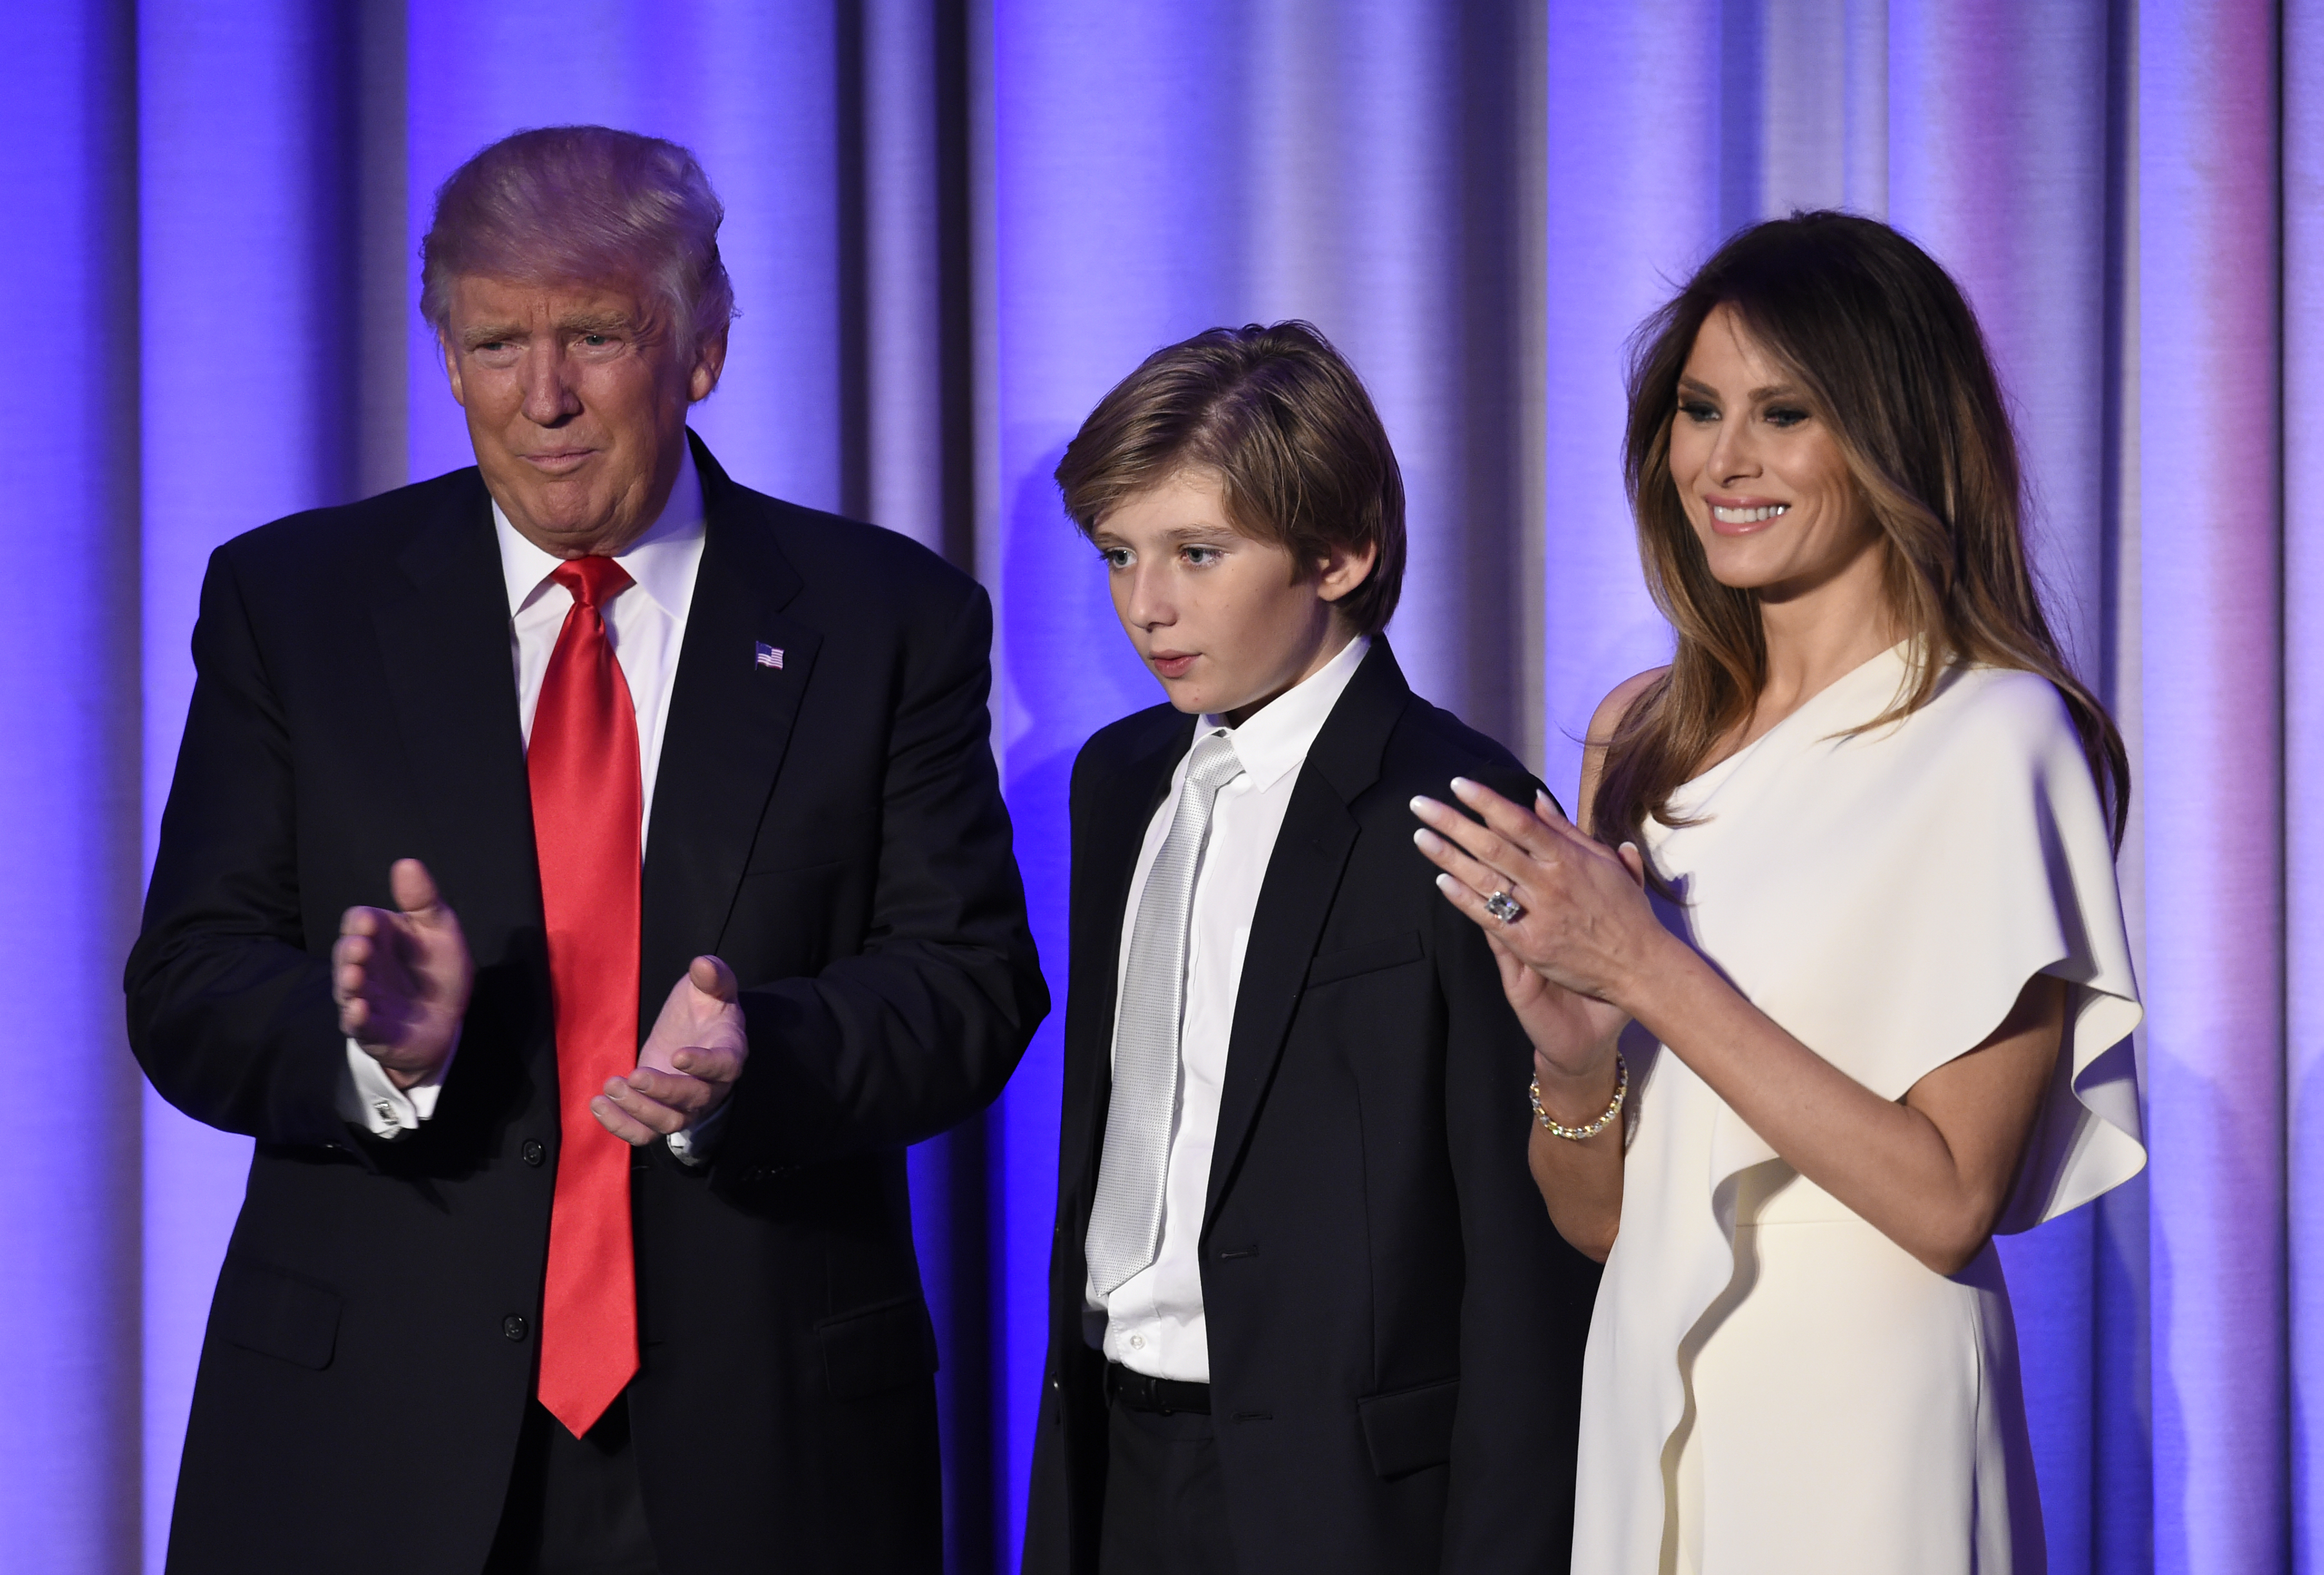 (FILES) This file photo taken on November 8, 2016 shows US President-elect Donald Trump arriving with his son Barron and wife Melania at the New York Hilton Midtown in New York on November 8, 2016.  Donald Trump's wife Melania and young son Barron will probably stay in New York when the president-elect moves into the White House, the transition team suggested November 20, 2016. The parents are wary of pulling their son out of school now, team communications director Jason Miller told reporters.  / AFP PHOTO / SAUL LOEB